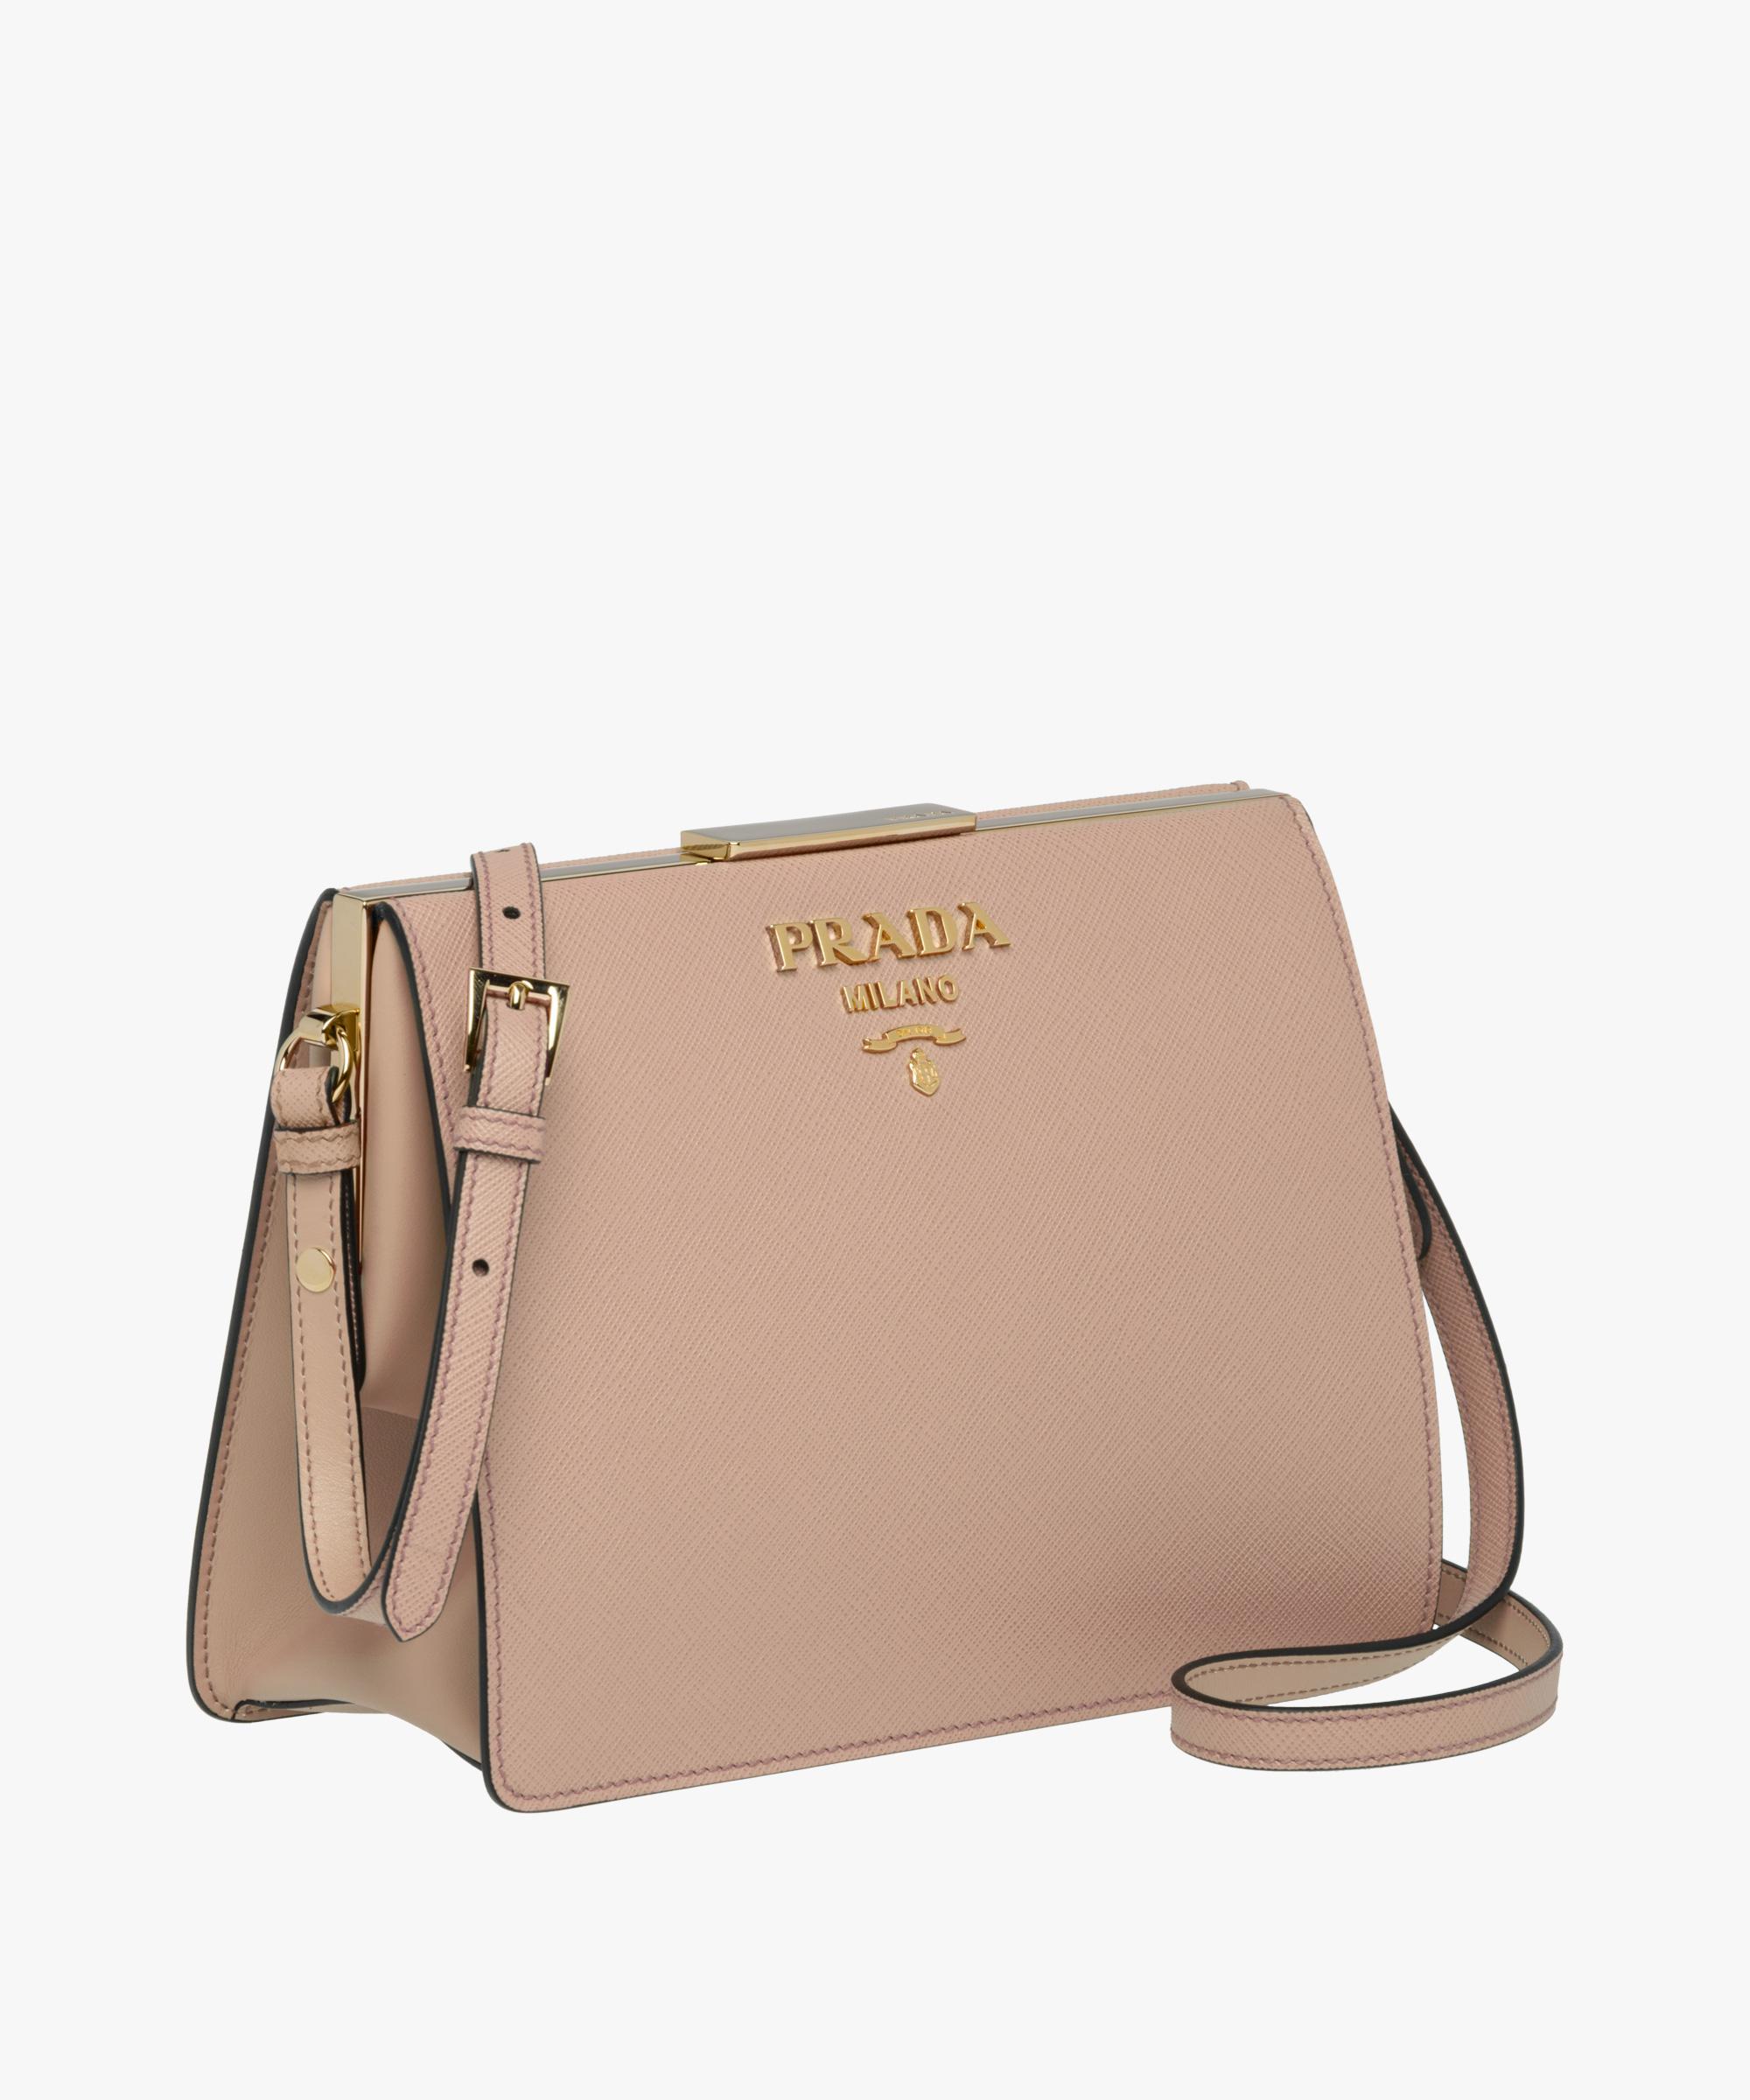 Prada Light Frame Saffiano Leather Bag in Natural | Lyst